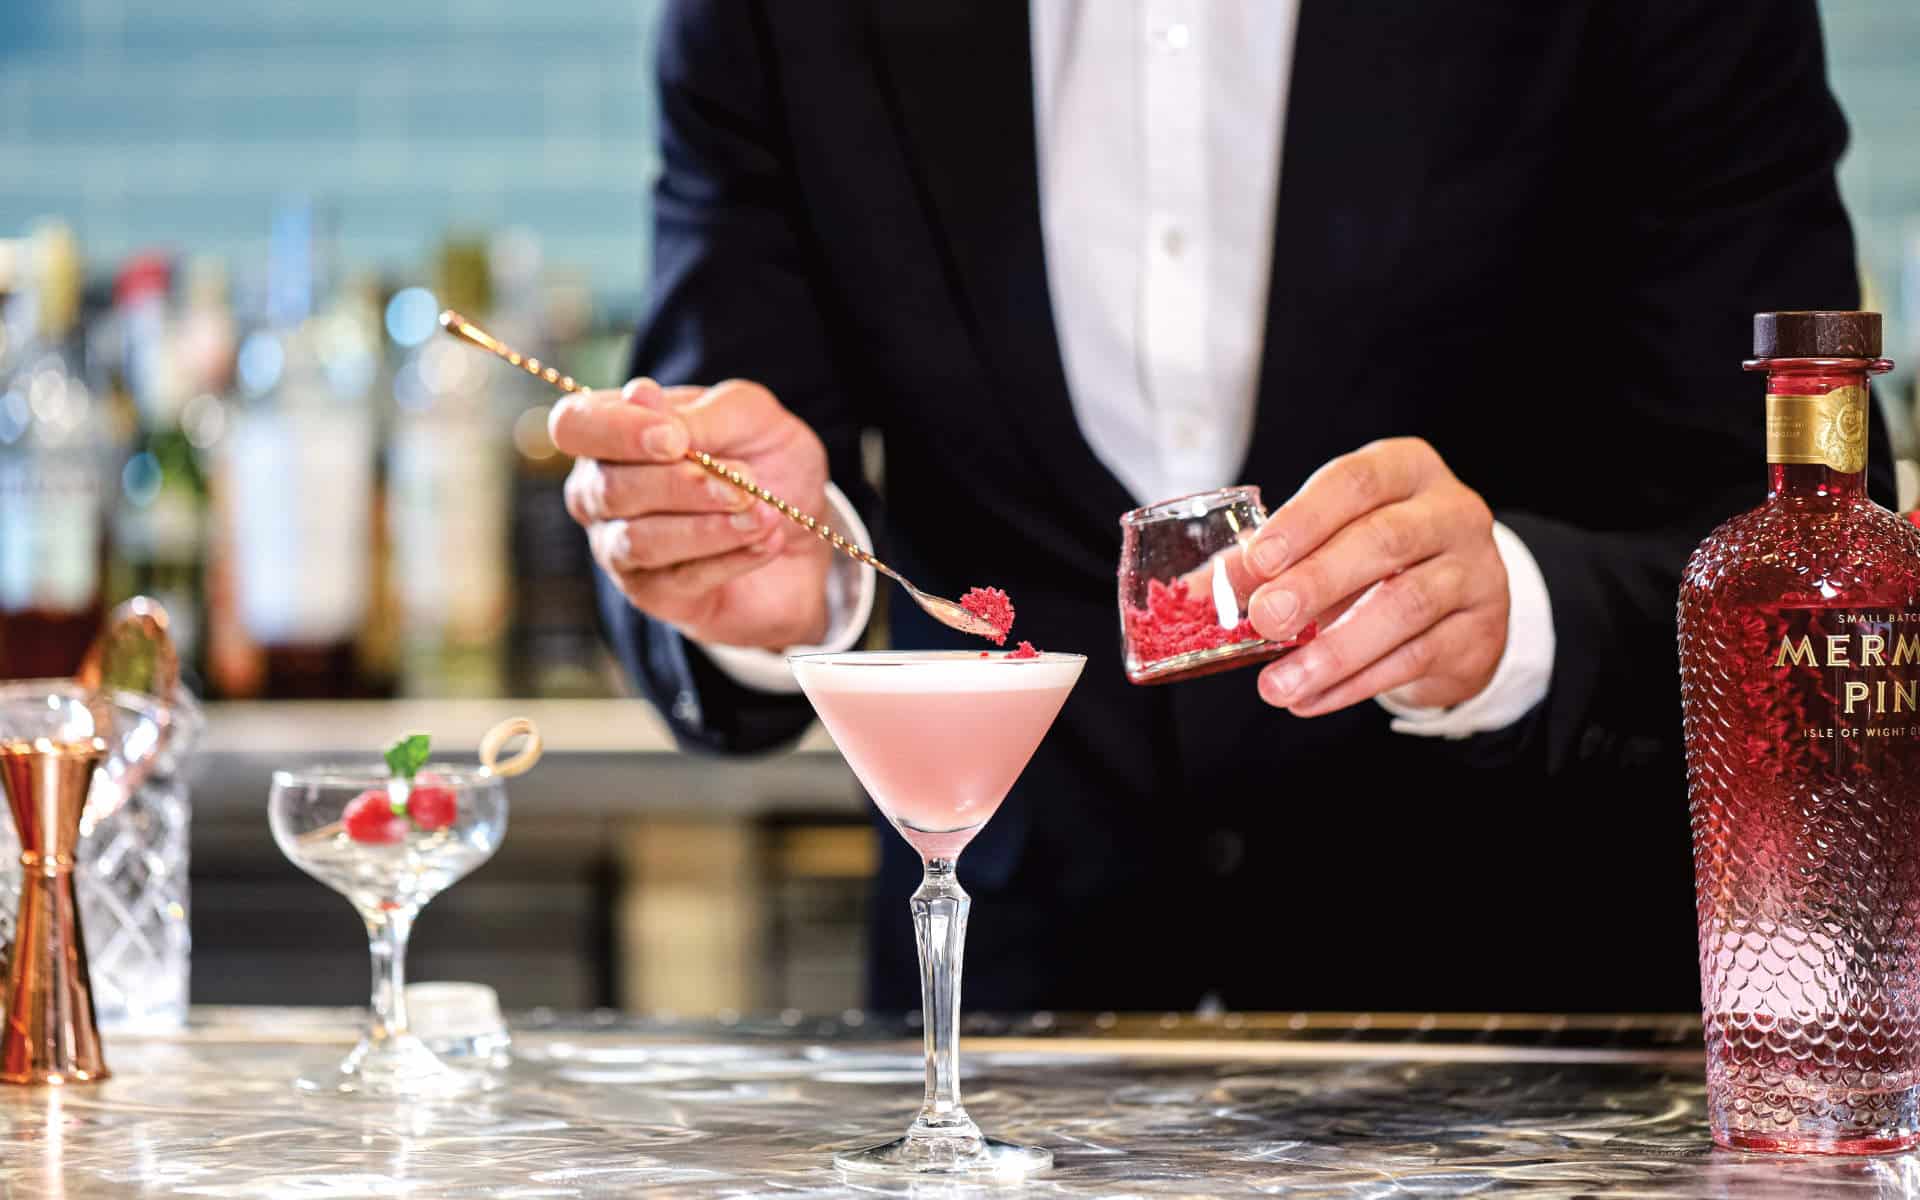 Oceania Cruises new Vista will premier new coctails and Champagne experiences.